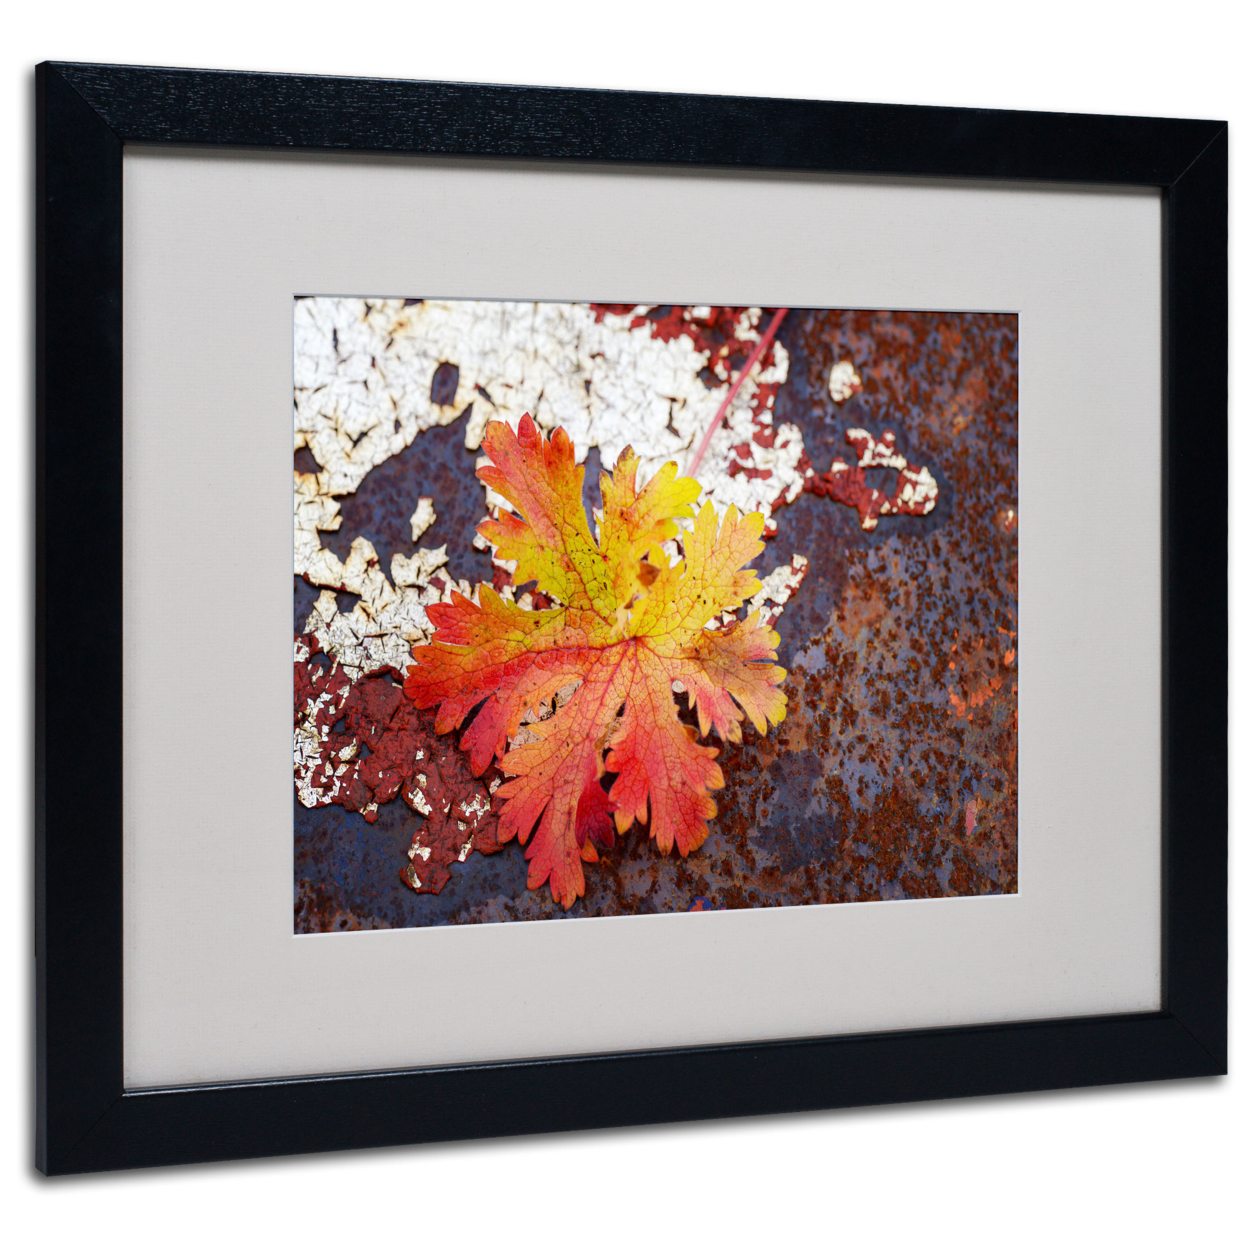 Philippe Sainte-Laudy 'Autumn Rust' Black Wooden Framed Art 18 X 22 Inches